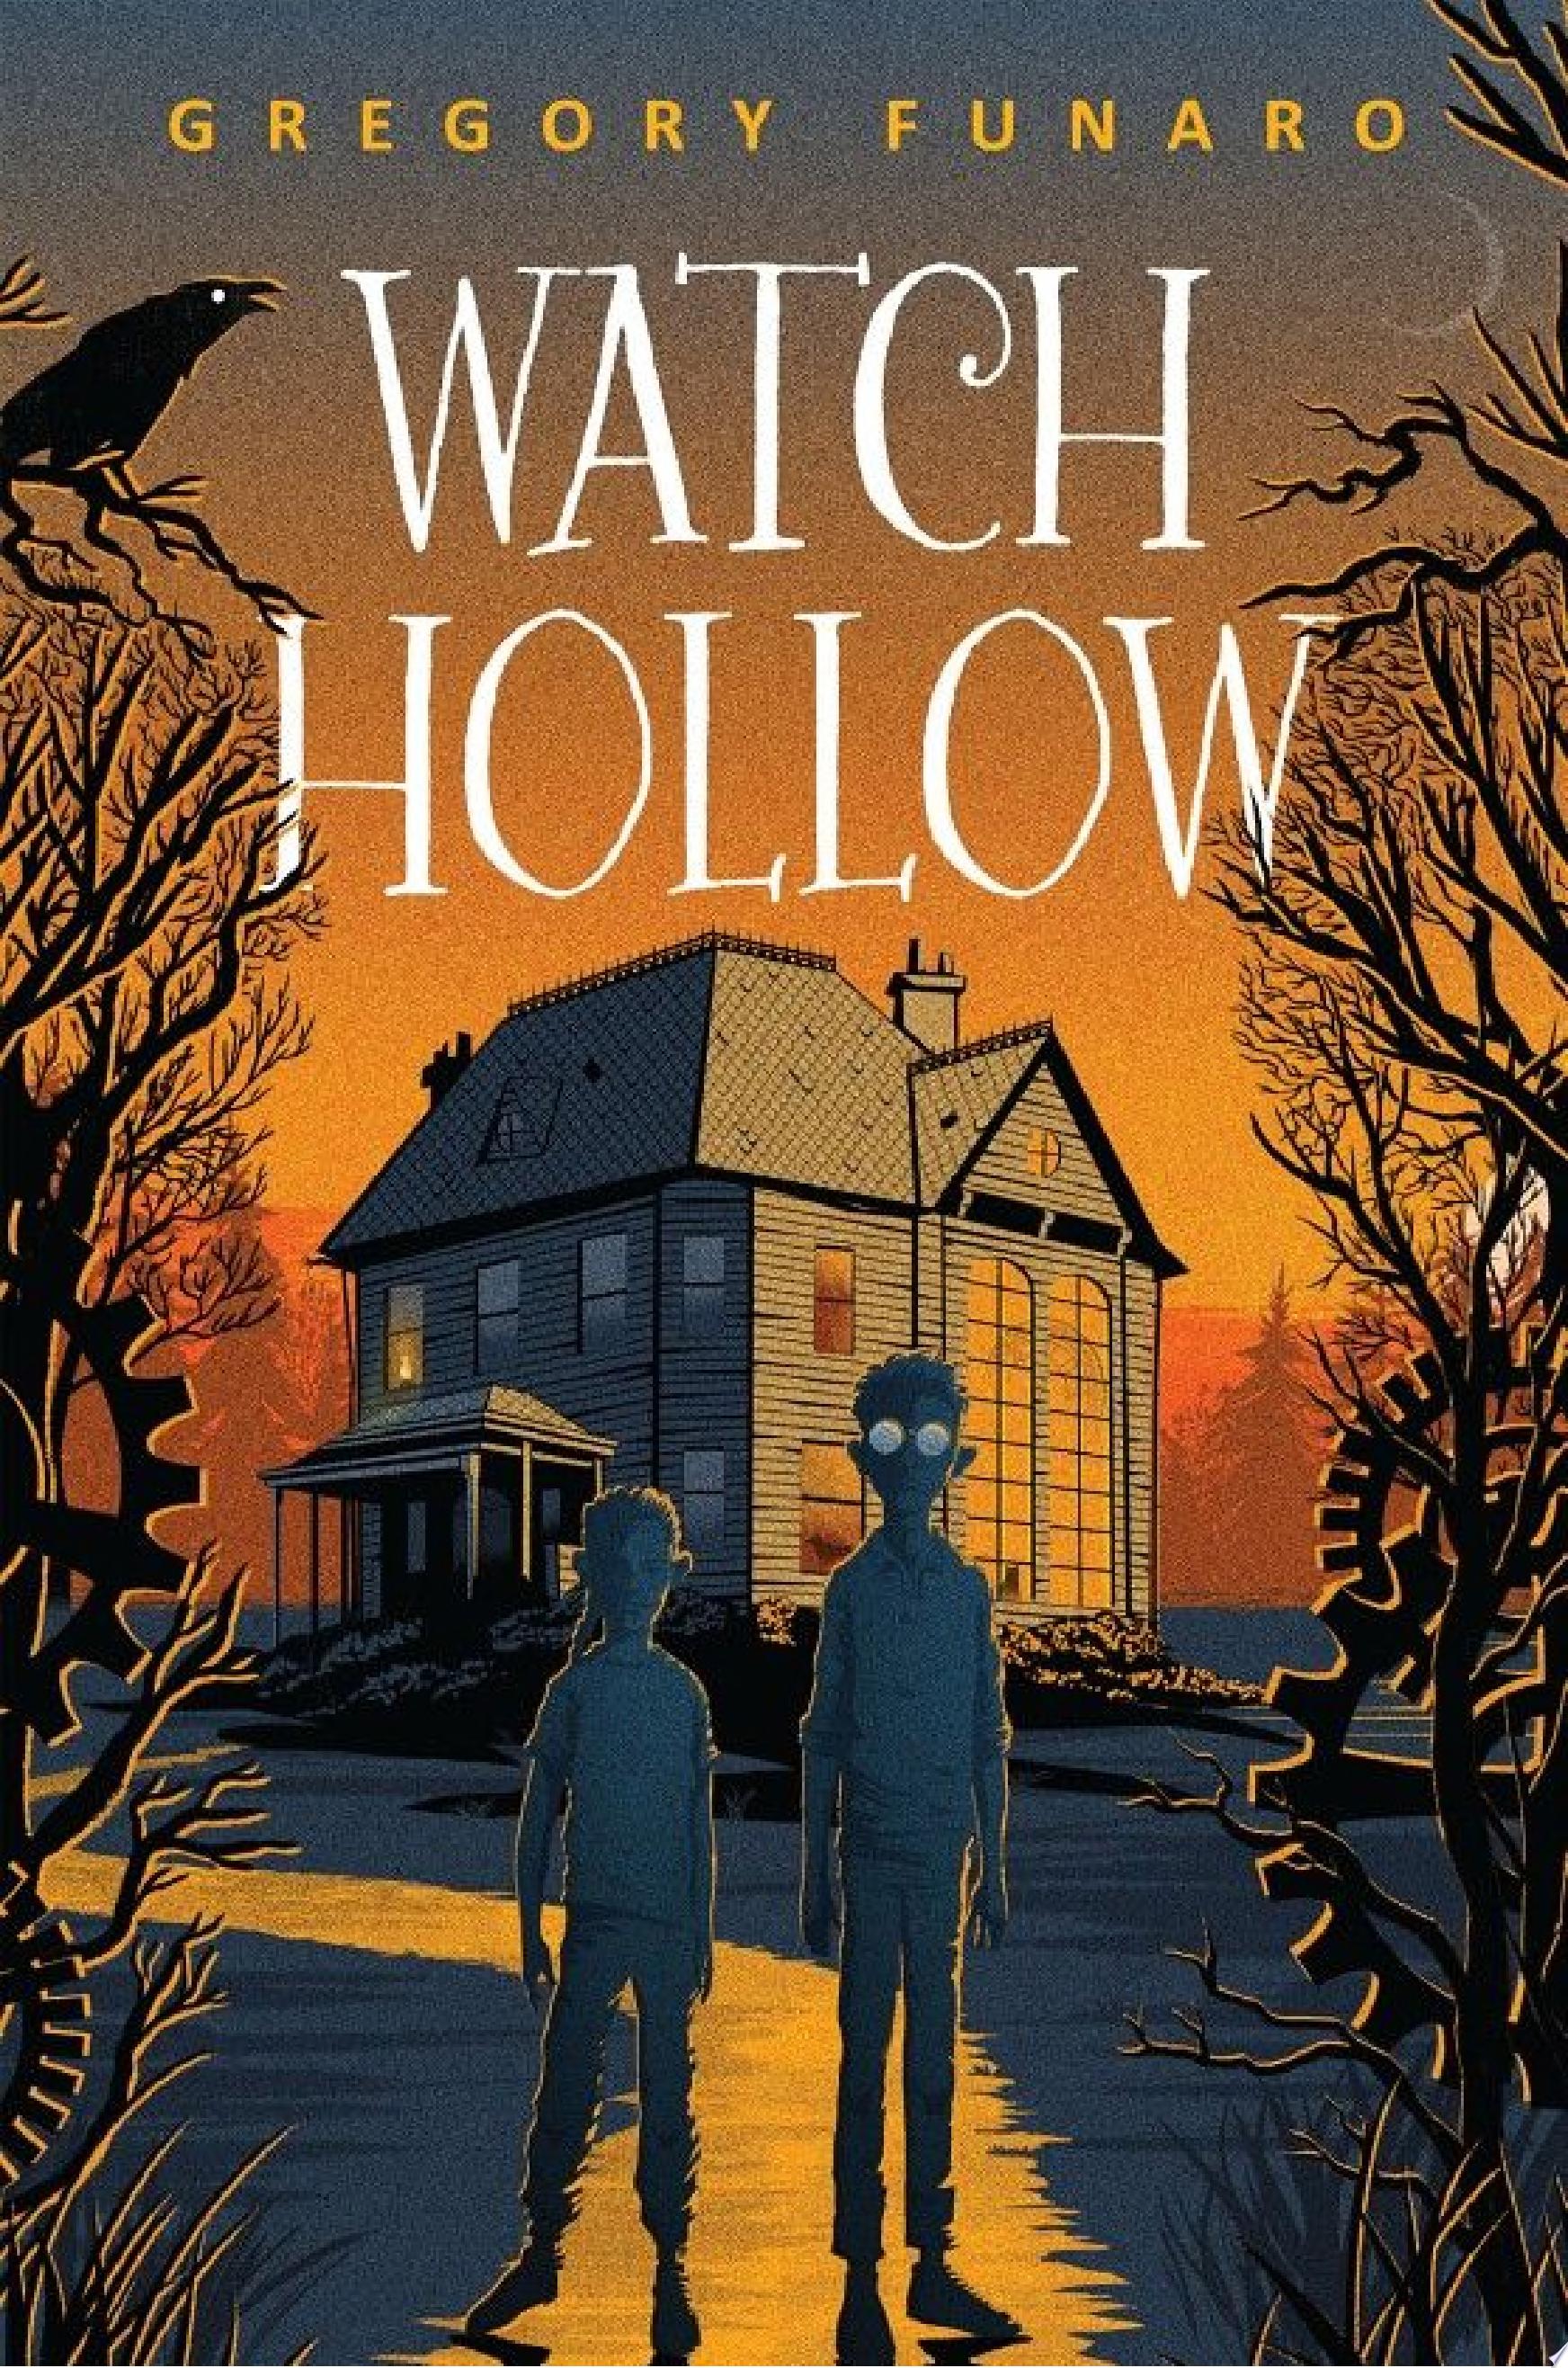 Image for "Watch Hollow"